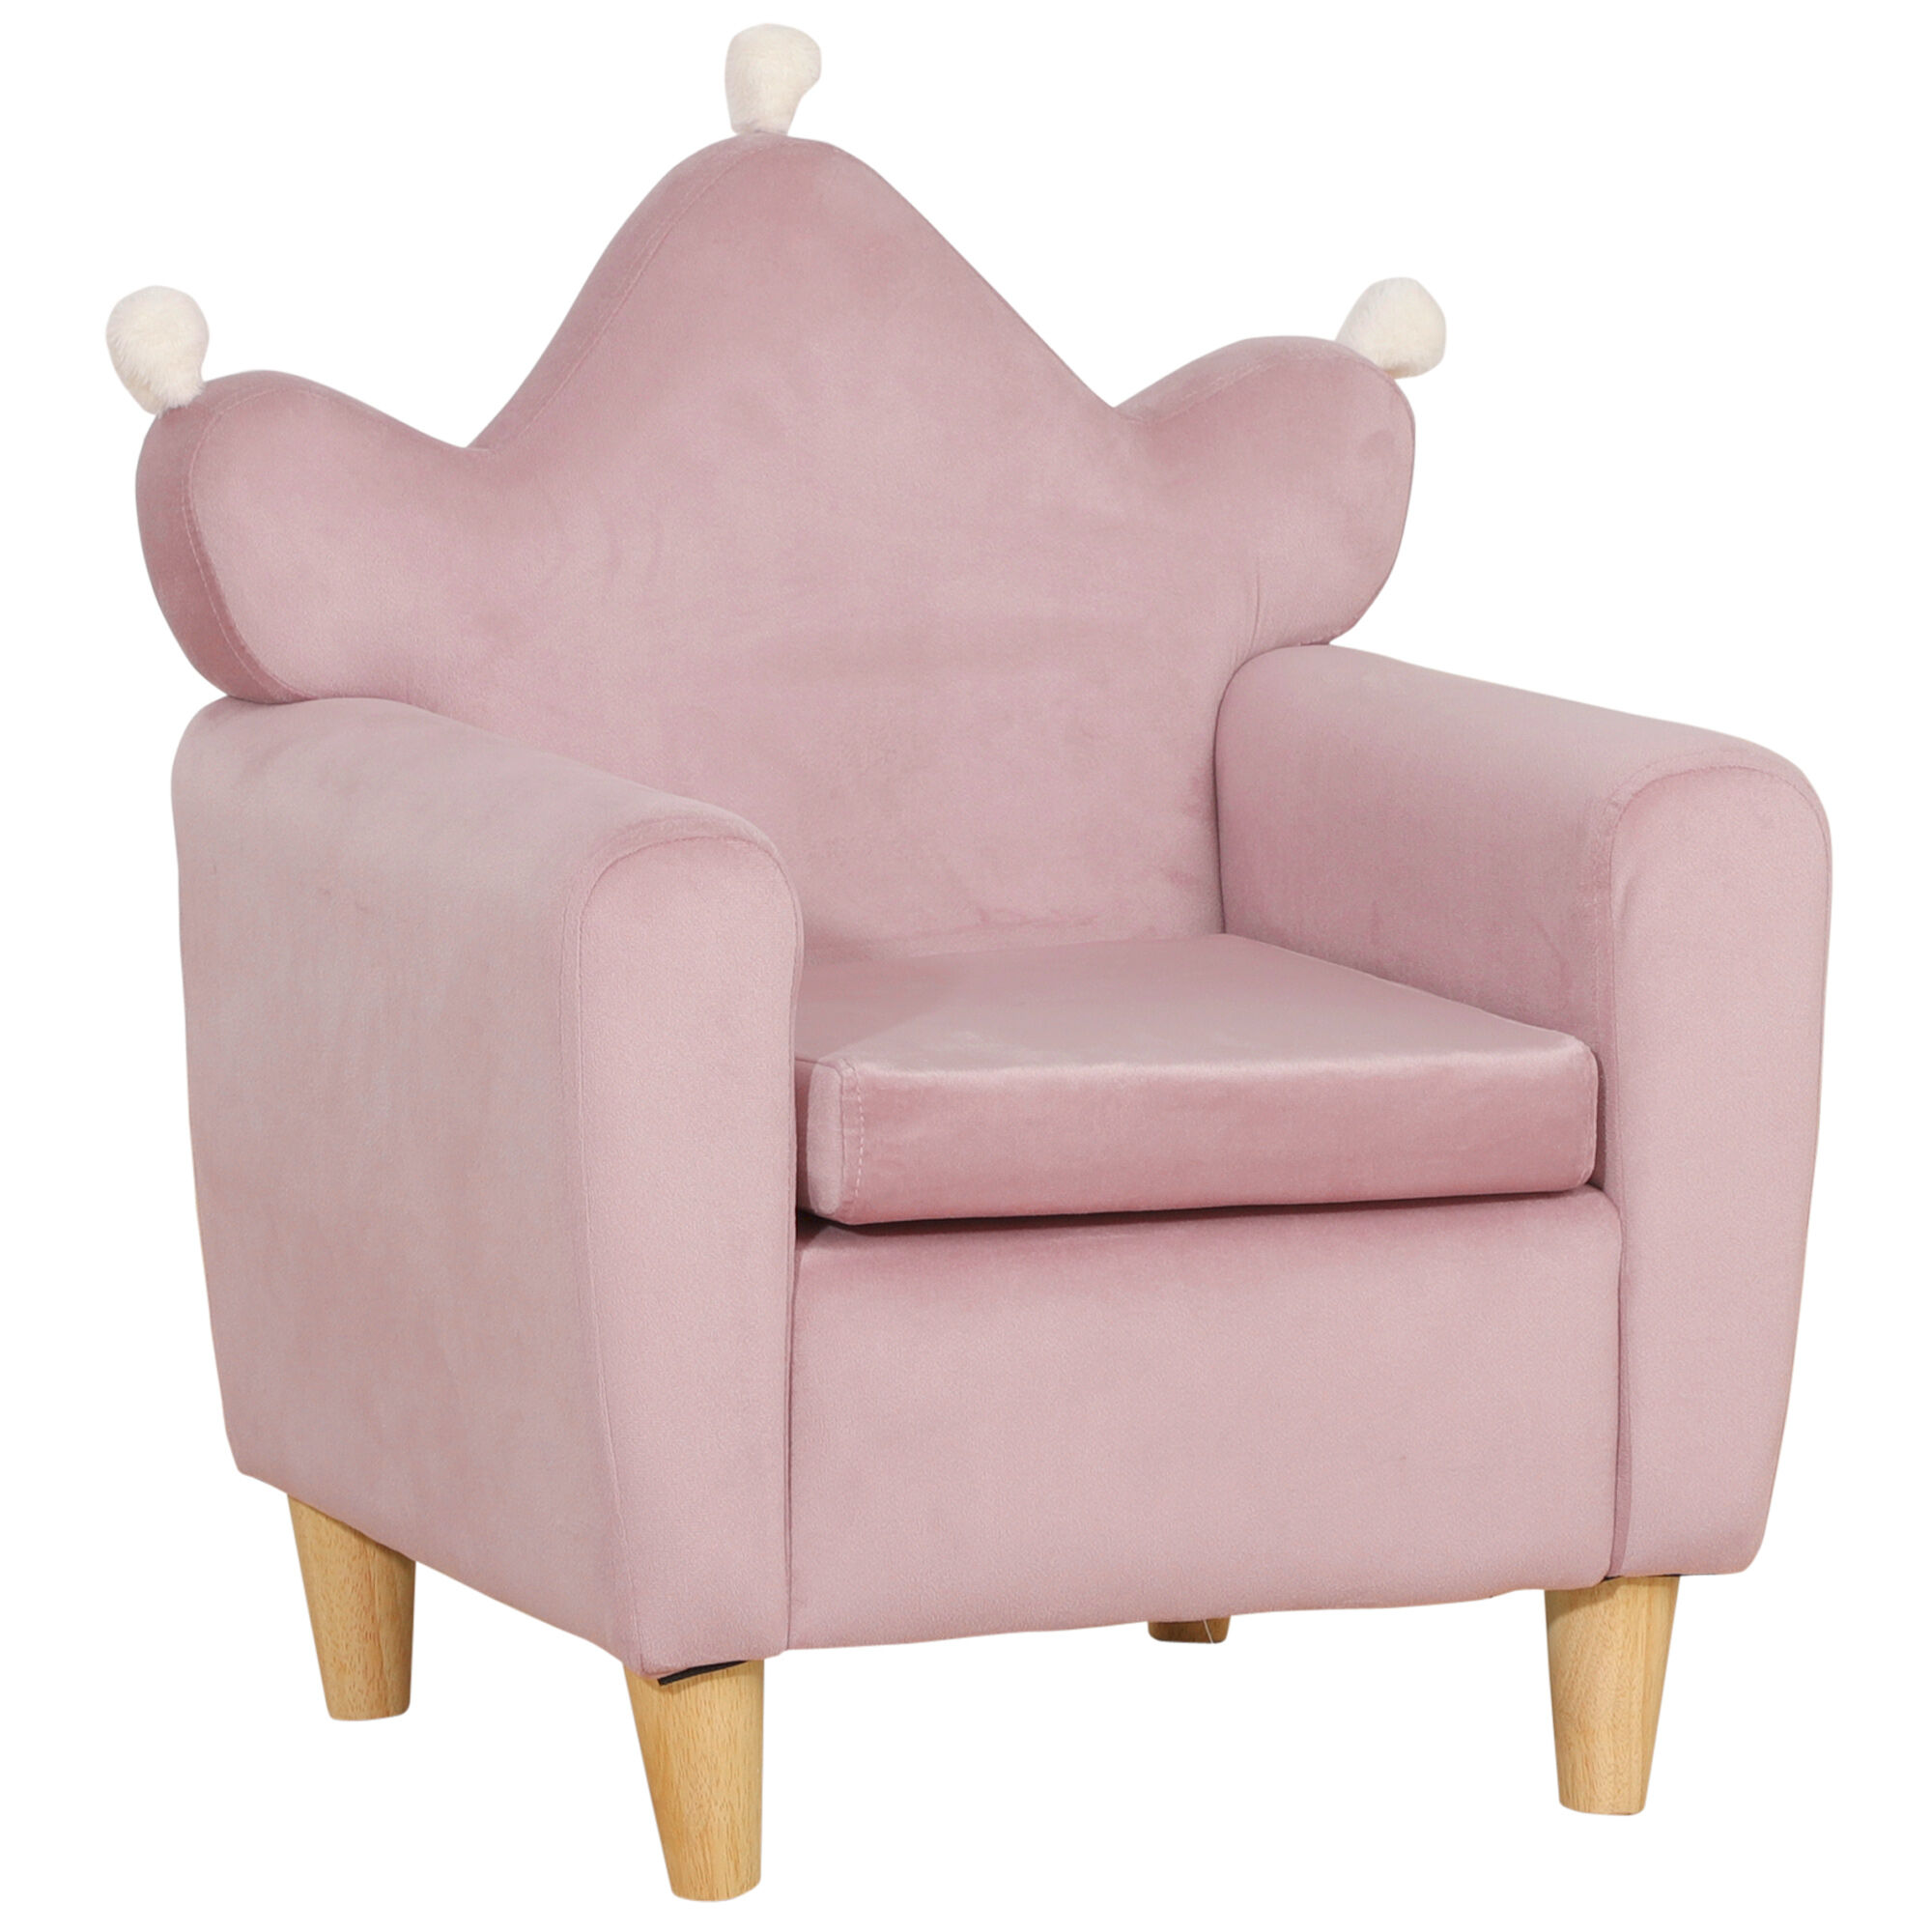 Qaba Pink Crown Throne Kids Sofa Single Lounger Armchair Strong Frame for Relaxing TV Studying   Aosom.com